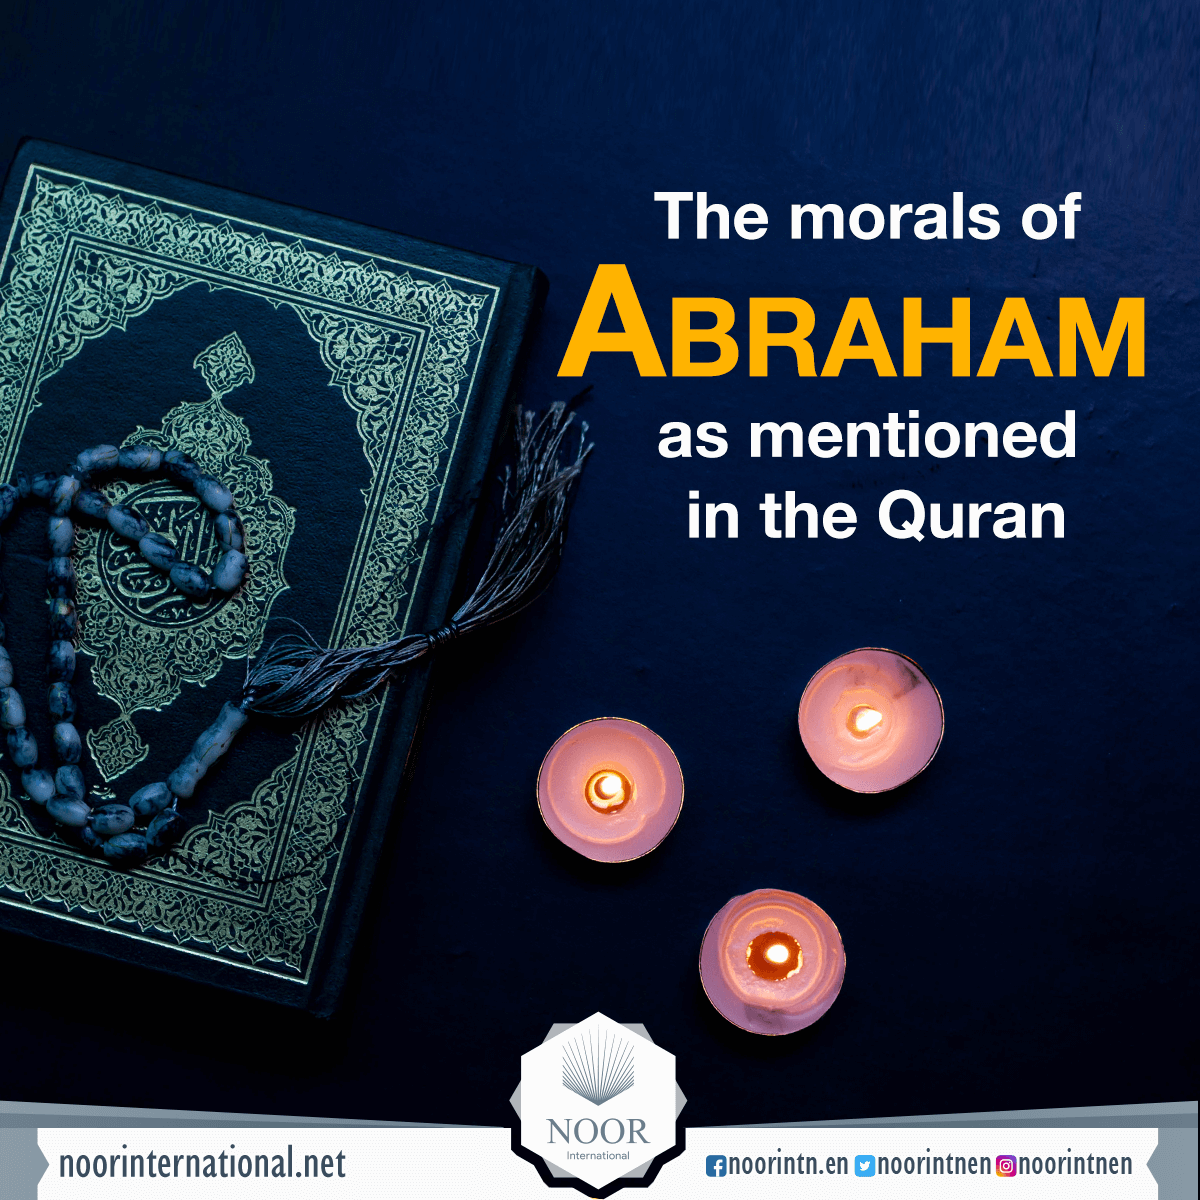 The morals of Abraham as mentioned in the Quran